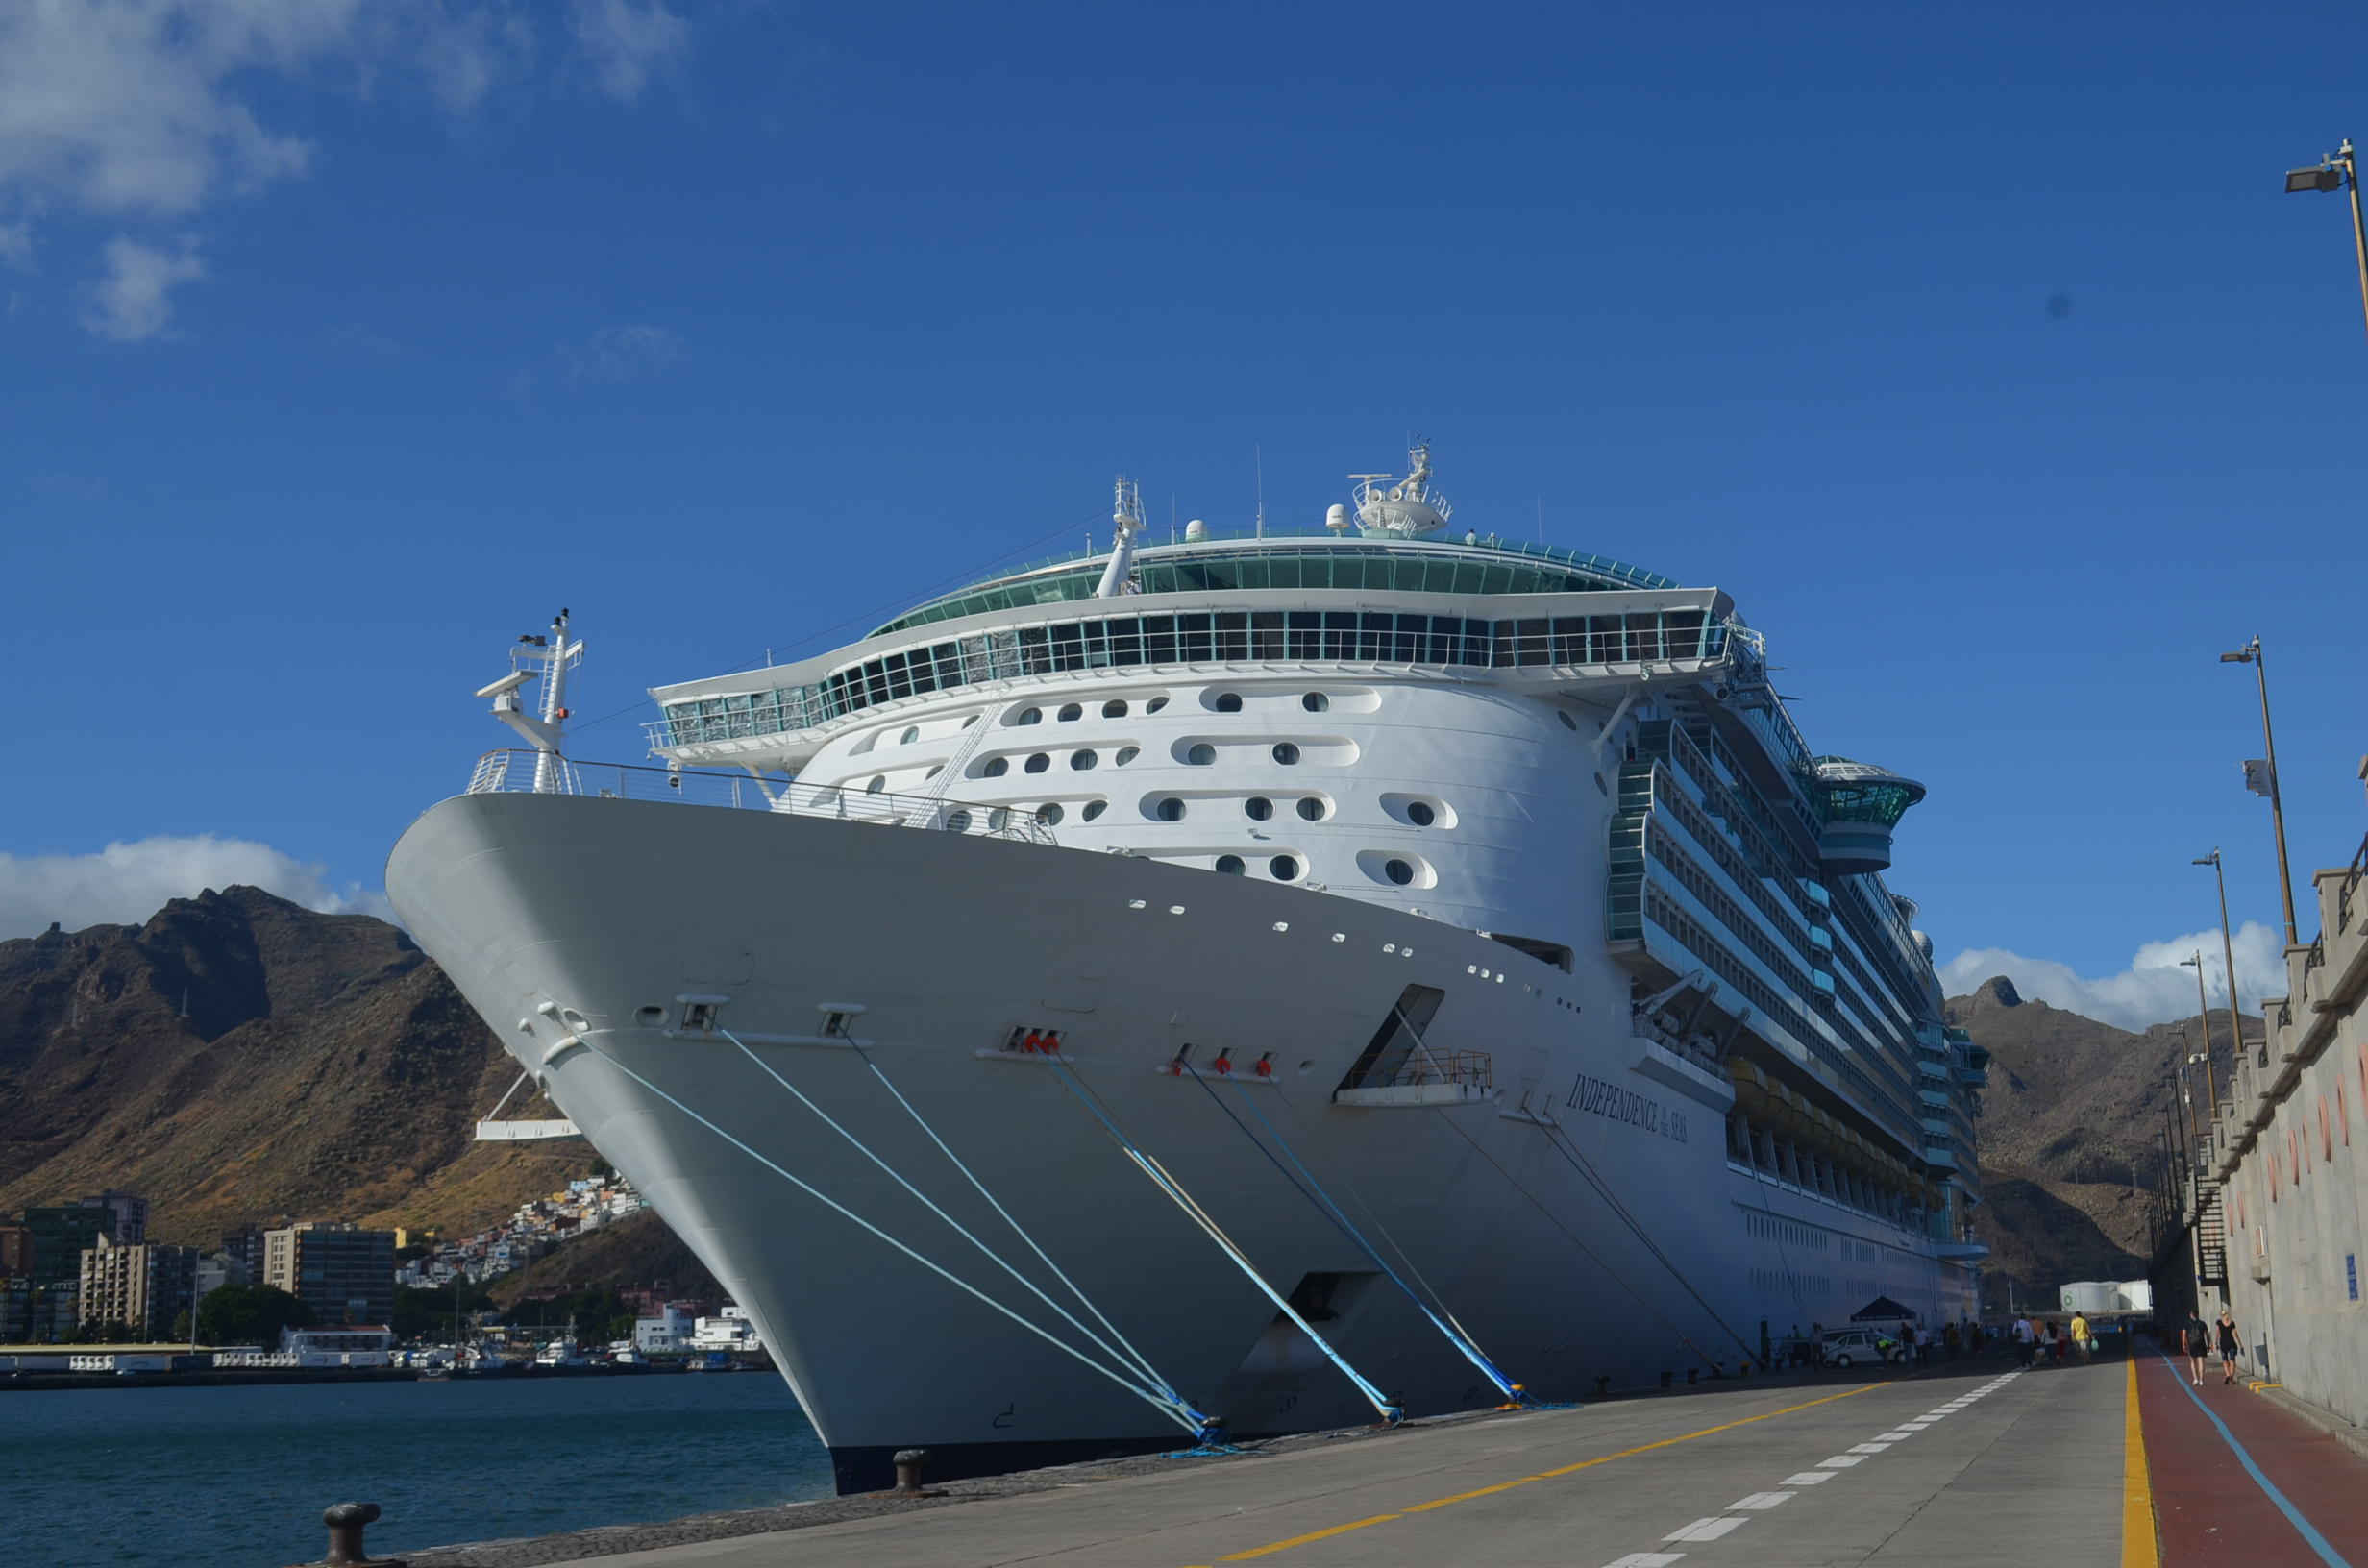 INDEPENDENCE OF THE SEAS S.C. Tenerife, 13-09-2016 (1)